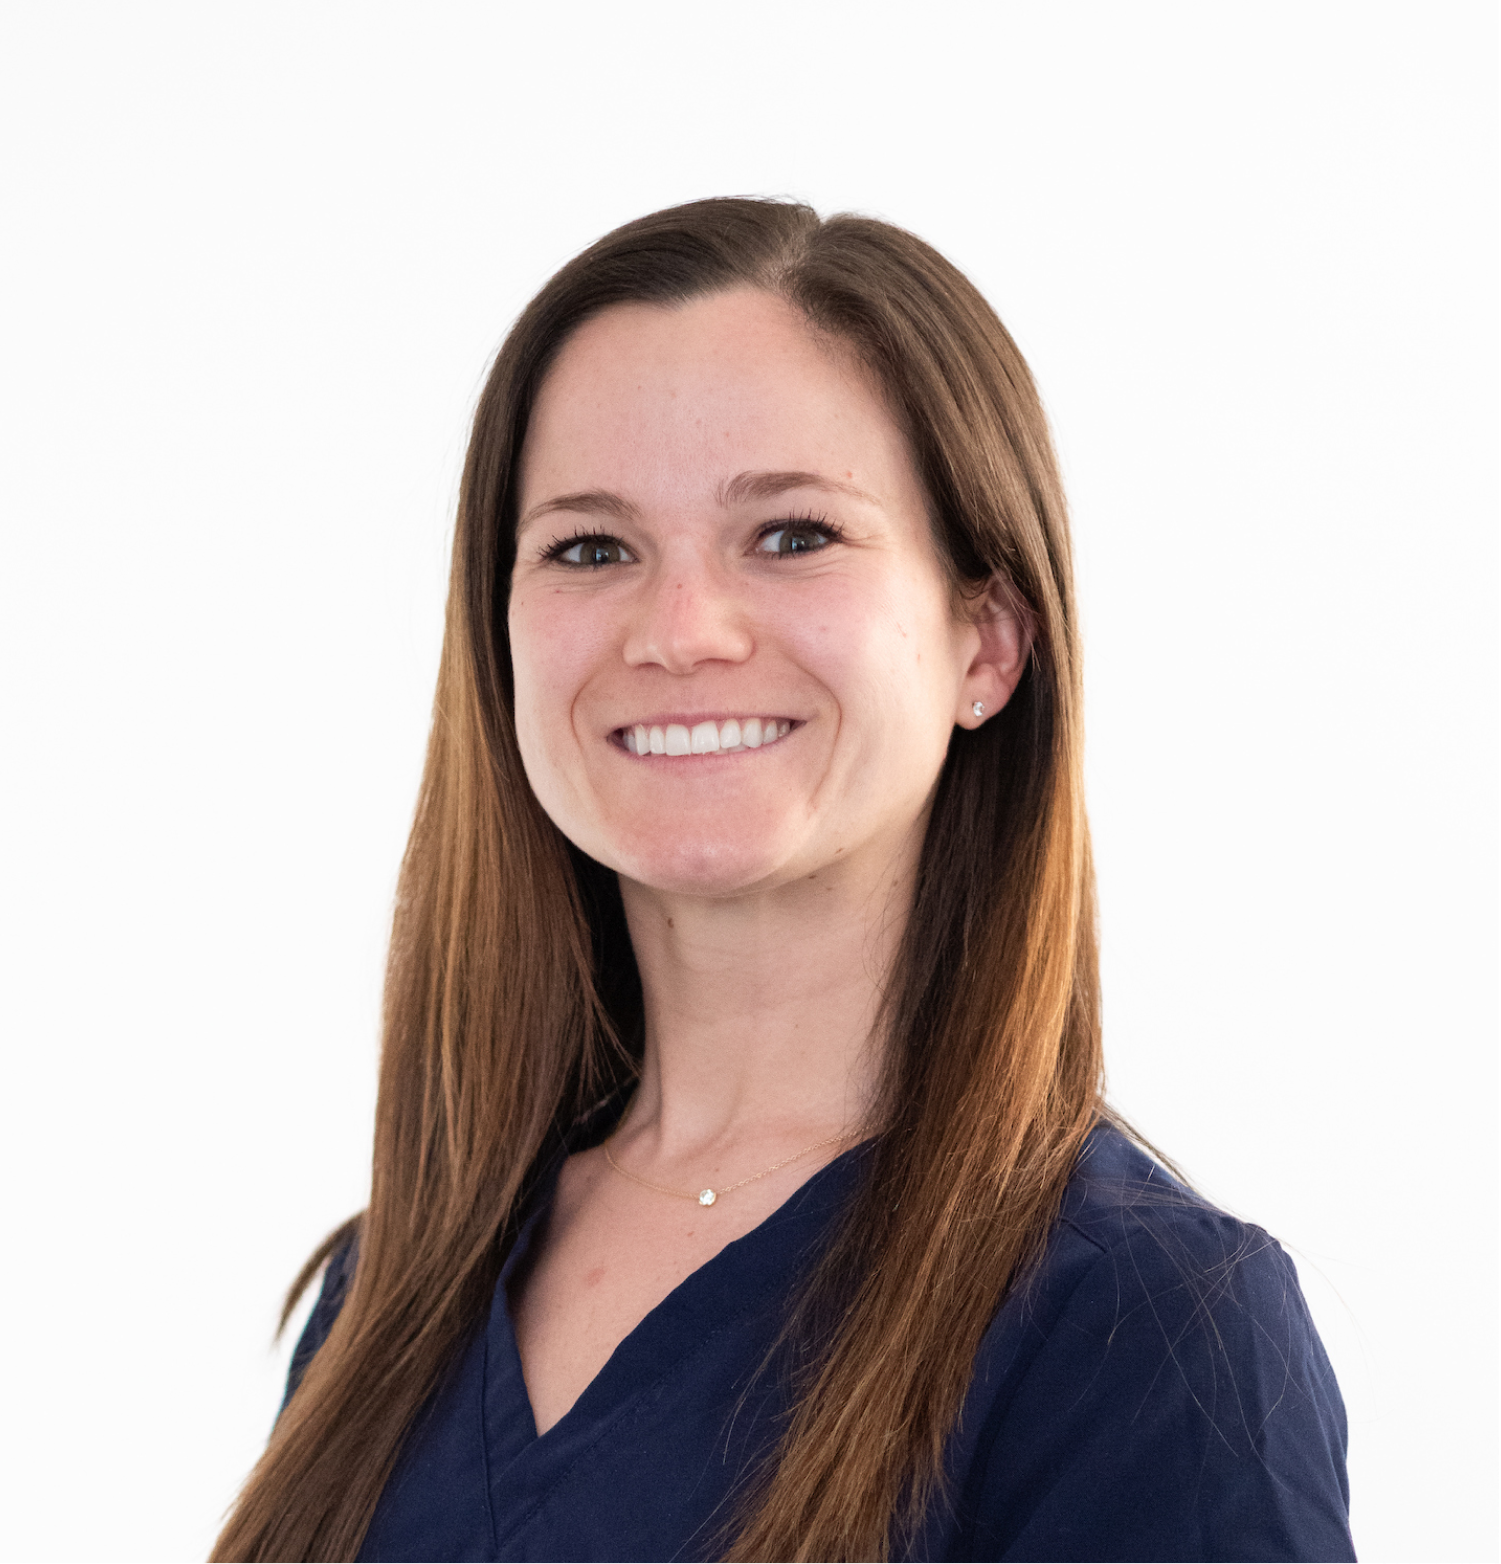 Dr. Amanda Carew, DDS is originally from Pelham, NY. She received her undergraduate degree in Chemistry from the University of North Carolina at Chapel Hill. Dr. Carew received her dental degree from New York University. She completed her general practice residency at New York-Presbyterian Weill Cornell Medical Center, which included training at Memorial Sloan Kettering. There she served as a peer mentor to her fellow dental students and volunteered in the special patient care clinic dedicated to treating patients with special needs. Outside of the practice, Dr. Carew enjoys running, snowboarding, playing tennis, and traveling.